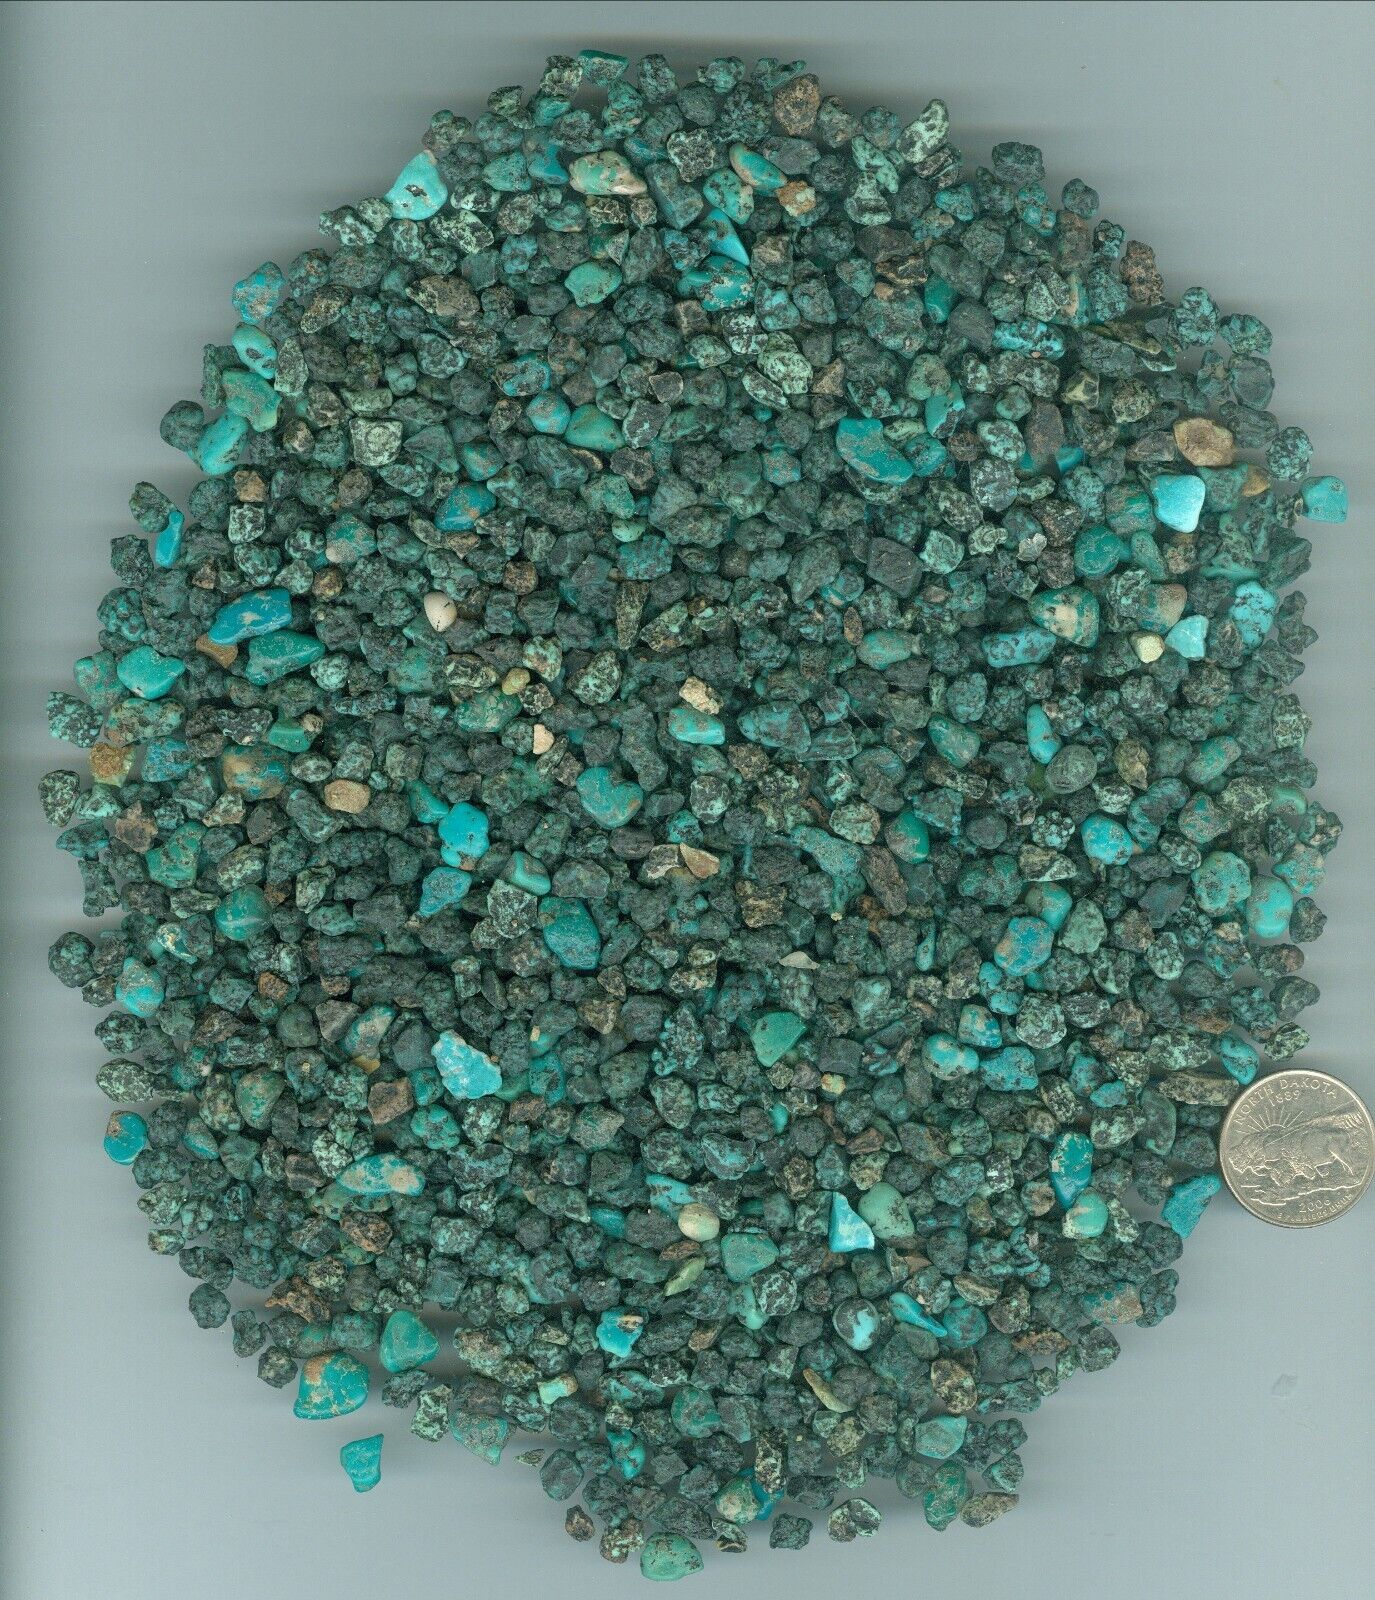 Stabilized Turquoise Rough 253 grams of American Fox Turquoise Cutting rough